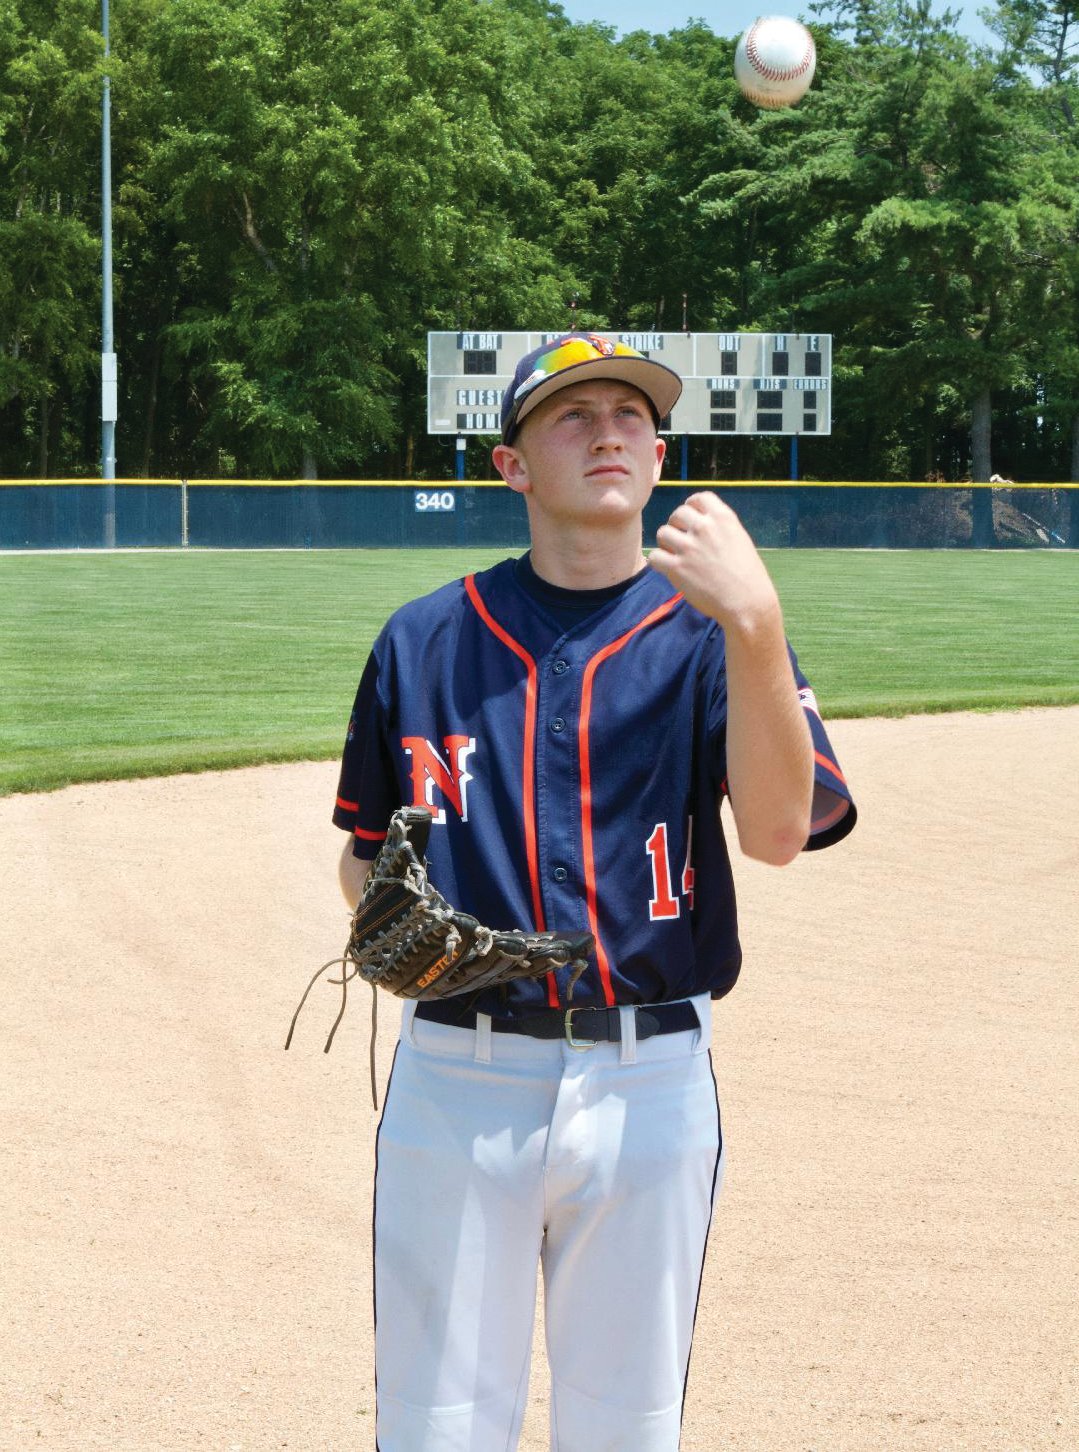 North Montgomery freshman Jarrod Kirsch was the area’s top pitcher this season with a 7-3 record and 2.28 earned run average